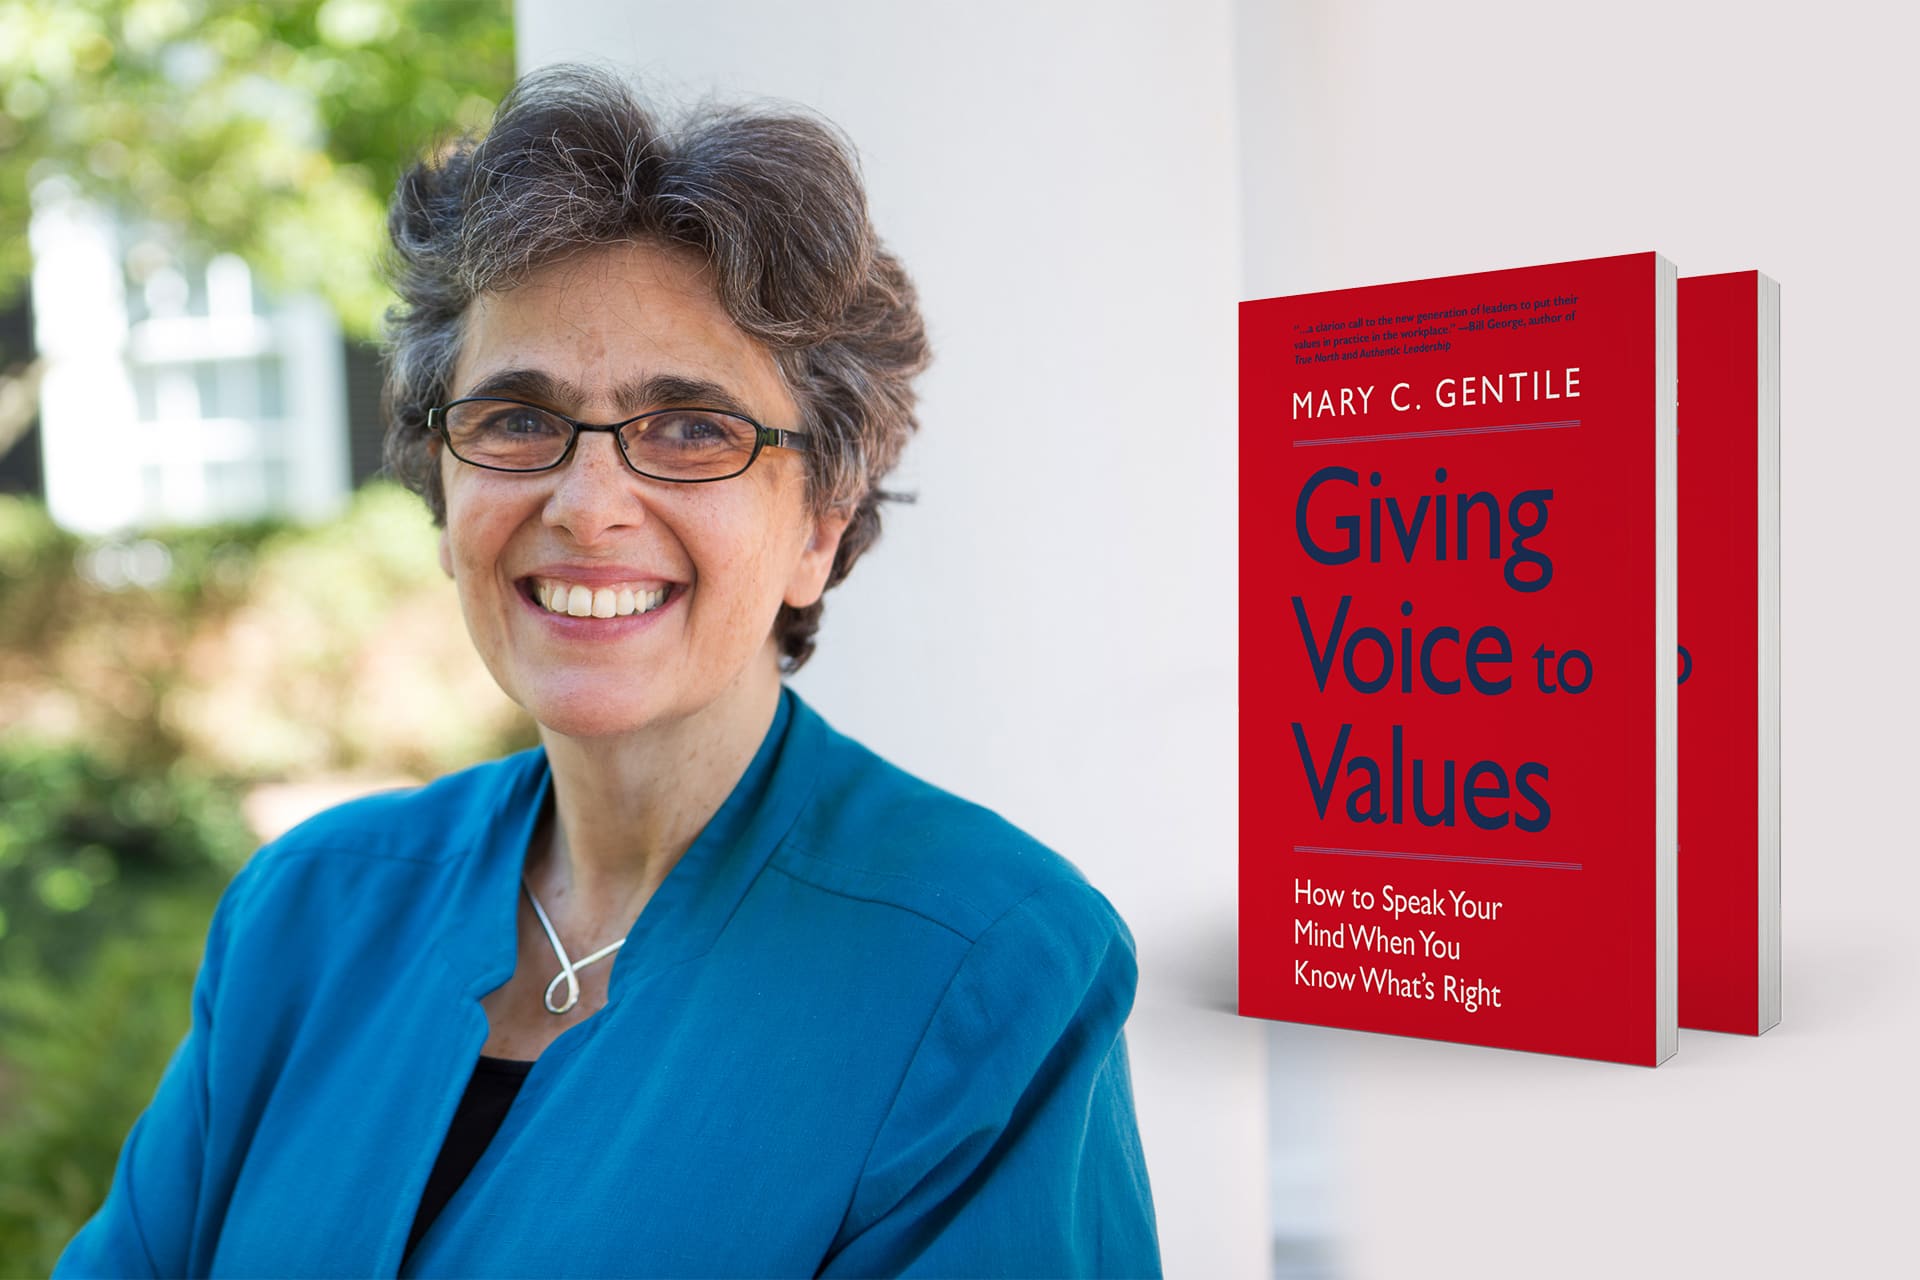 Mary Gentile giving voice to values